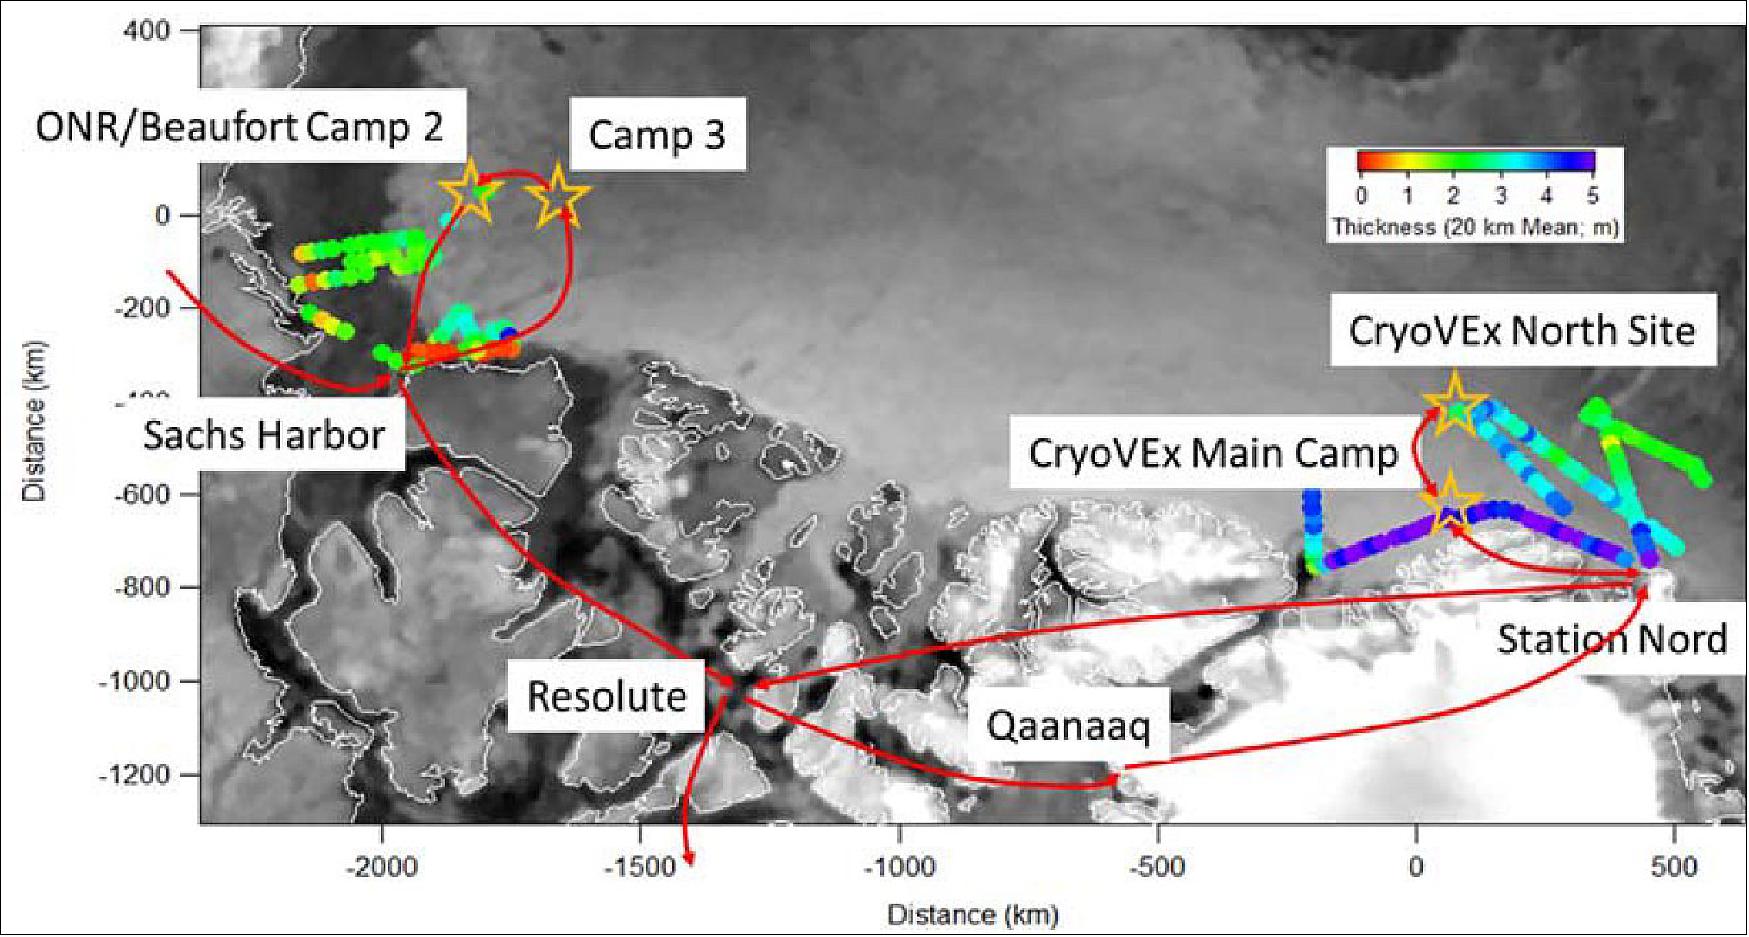 Figure 26: Map of CryoVEx 2014 study area showing location of land bases and ice camps, ice thickness survey profiles with mean thickness of 20 km flight segments, and ground and air team travel route (image credit: YU)